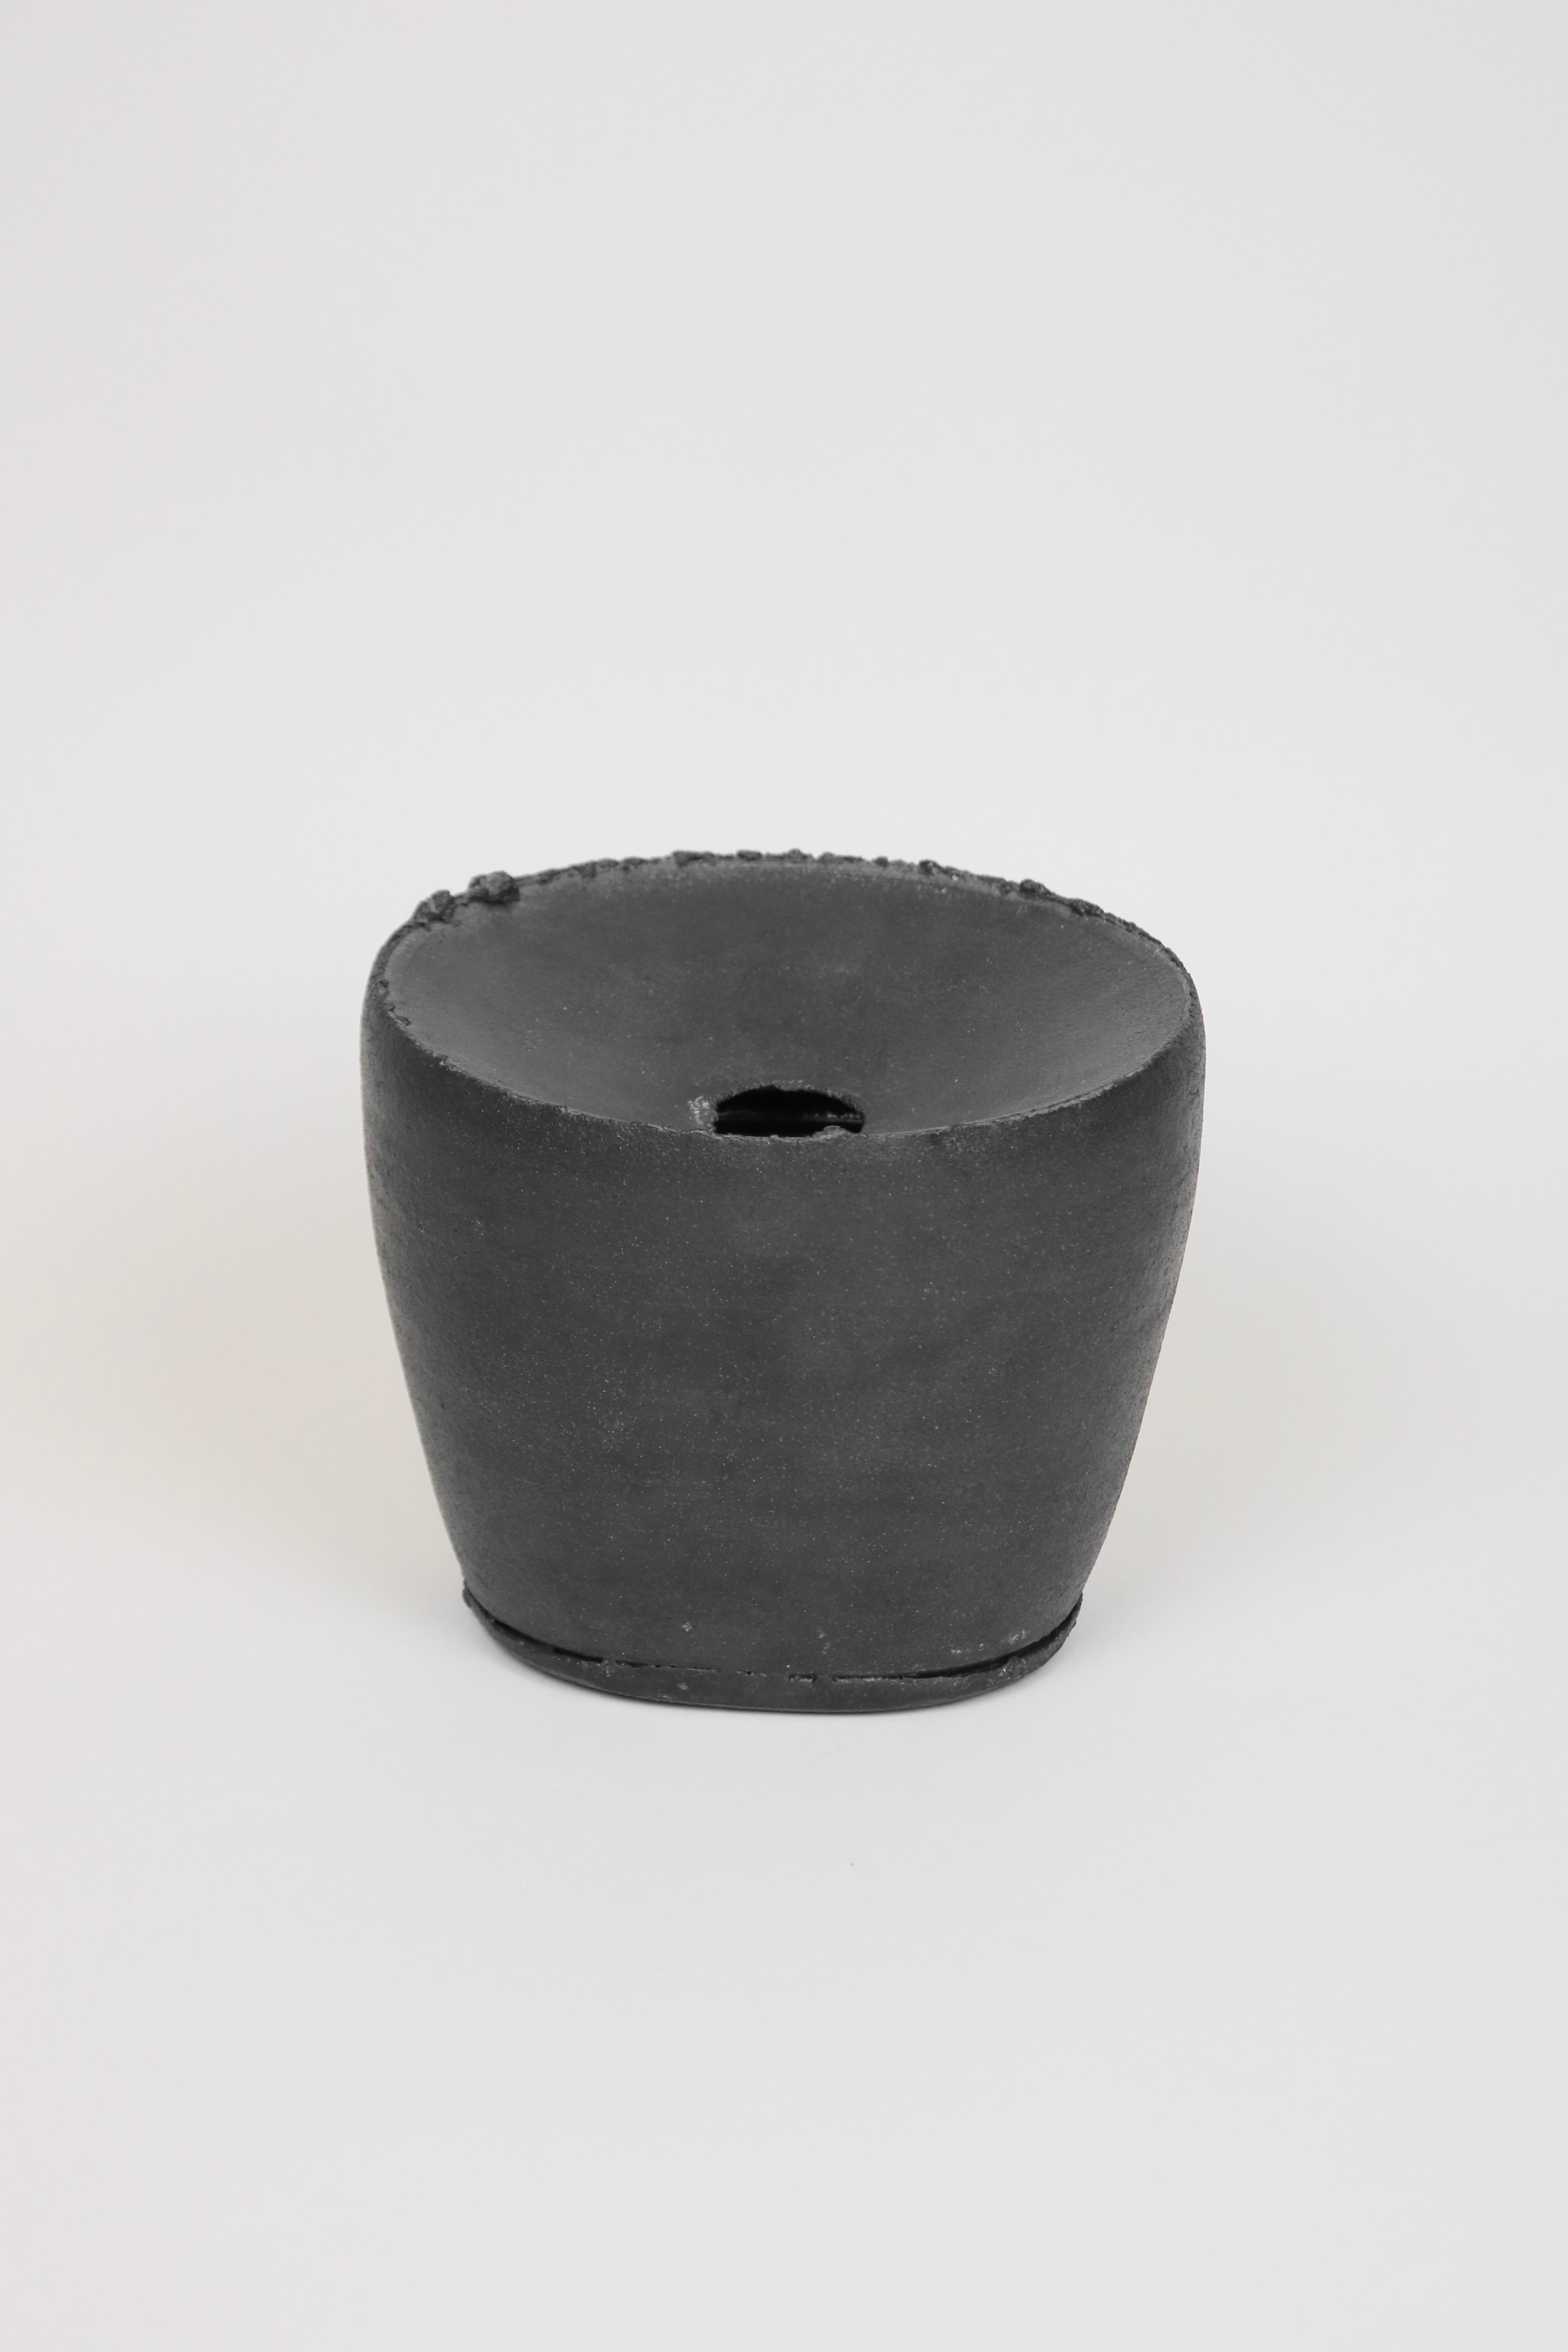 
A stoneware vase with matte black glaze and textured edges.

Dan Kelly (b1953) trained at Camberwell School of Arts and Crafts in the 70s. His work is wheel thrown then manipulated and altered, creating irregular forms.

H 18cm
D 21cm